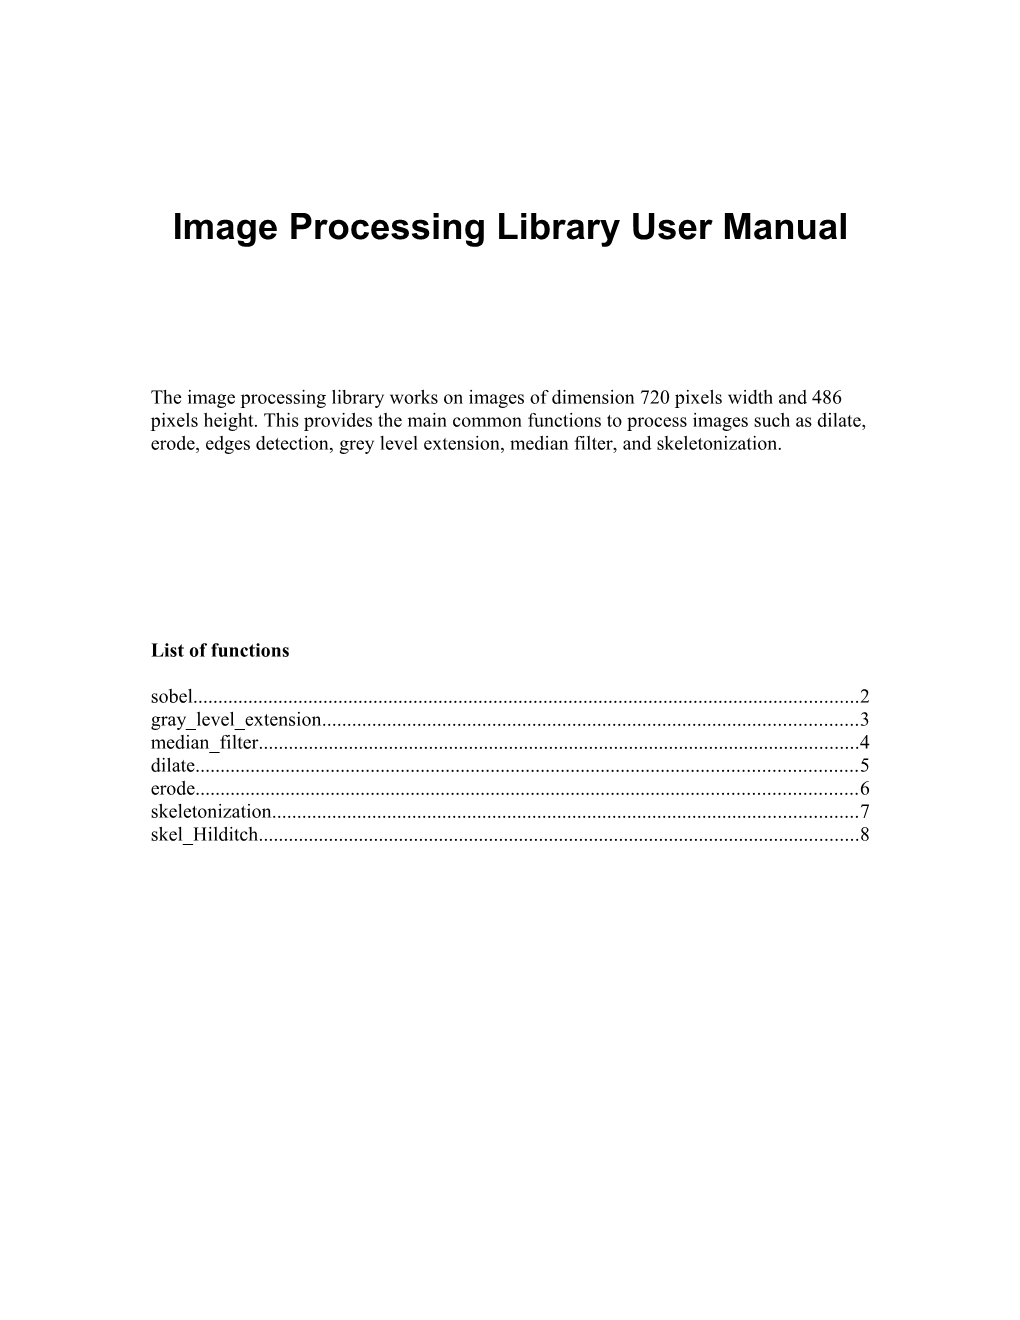 Image Processing Library User Manual